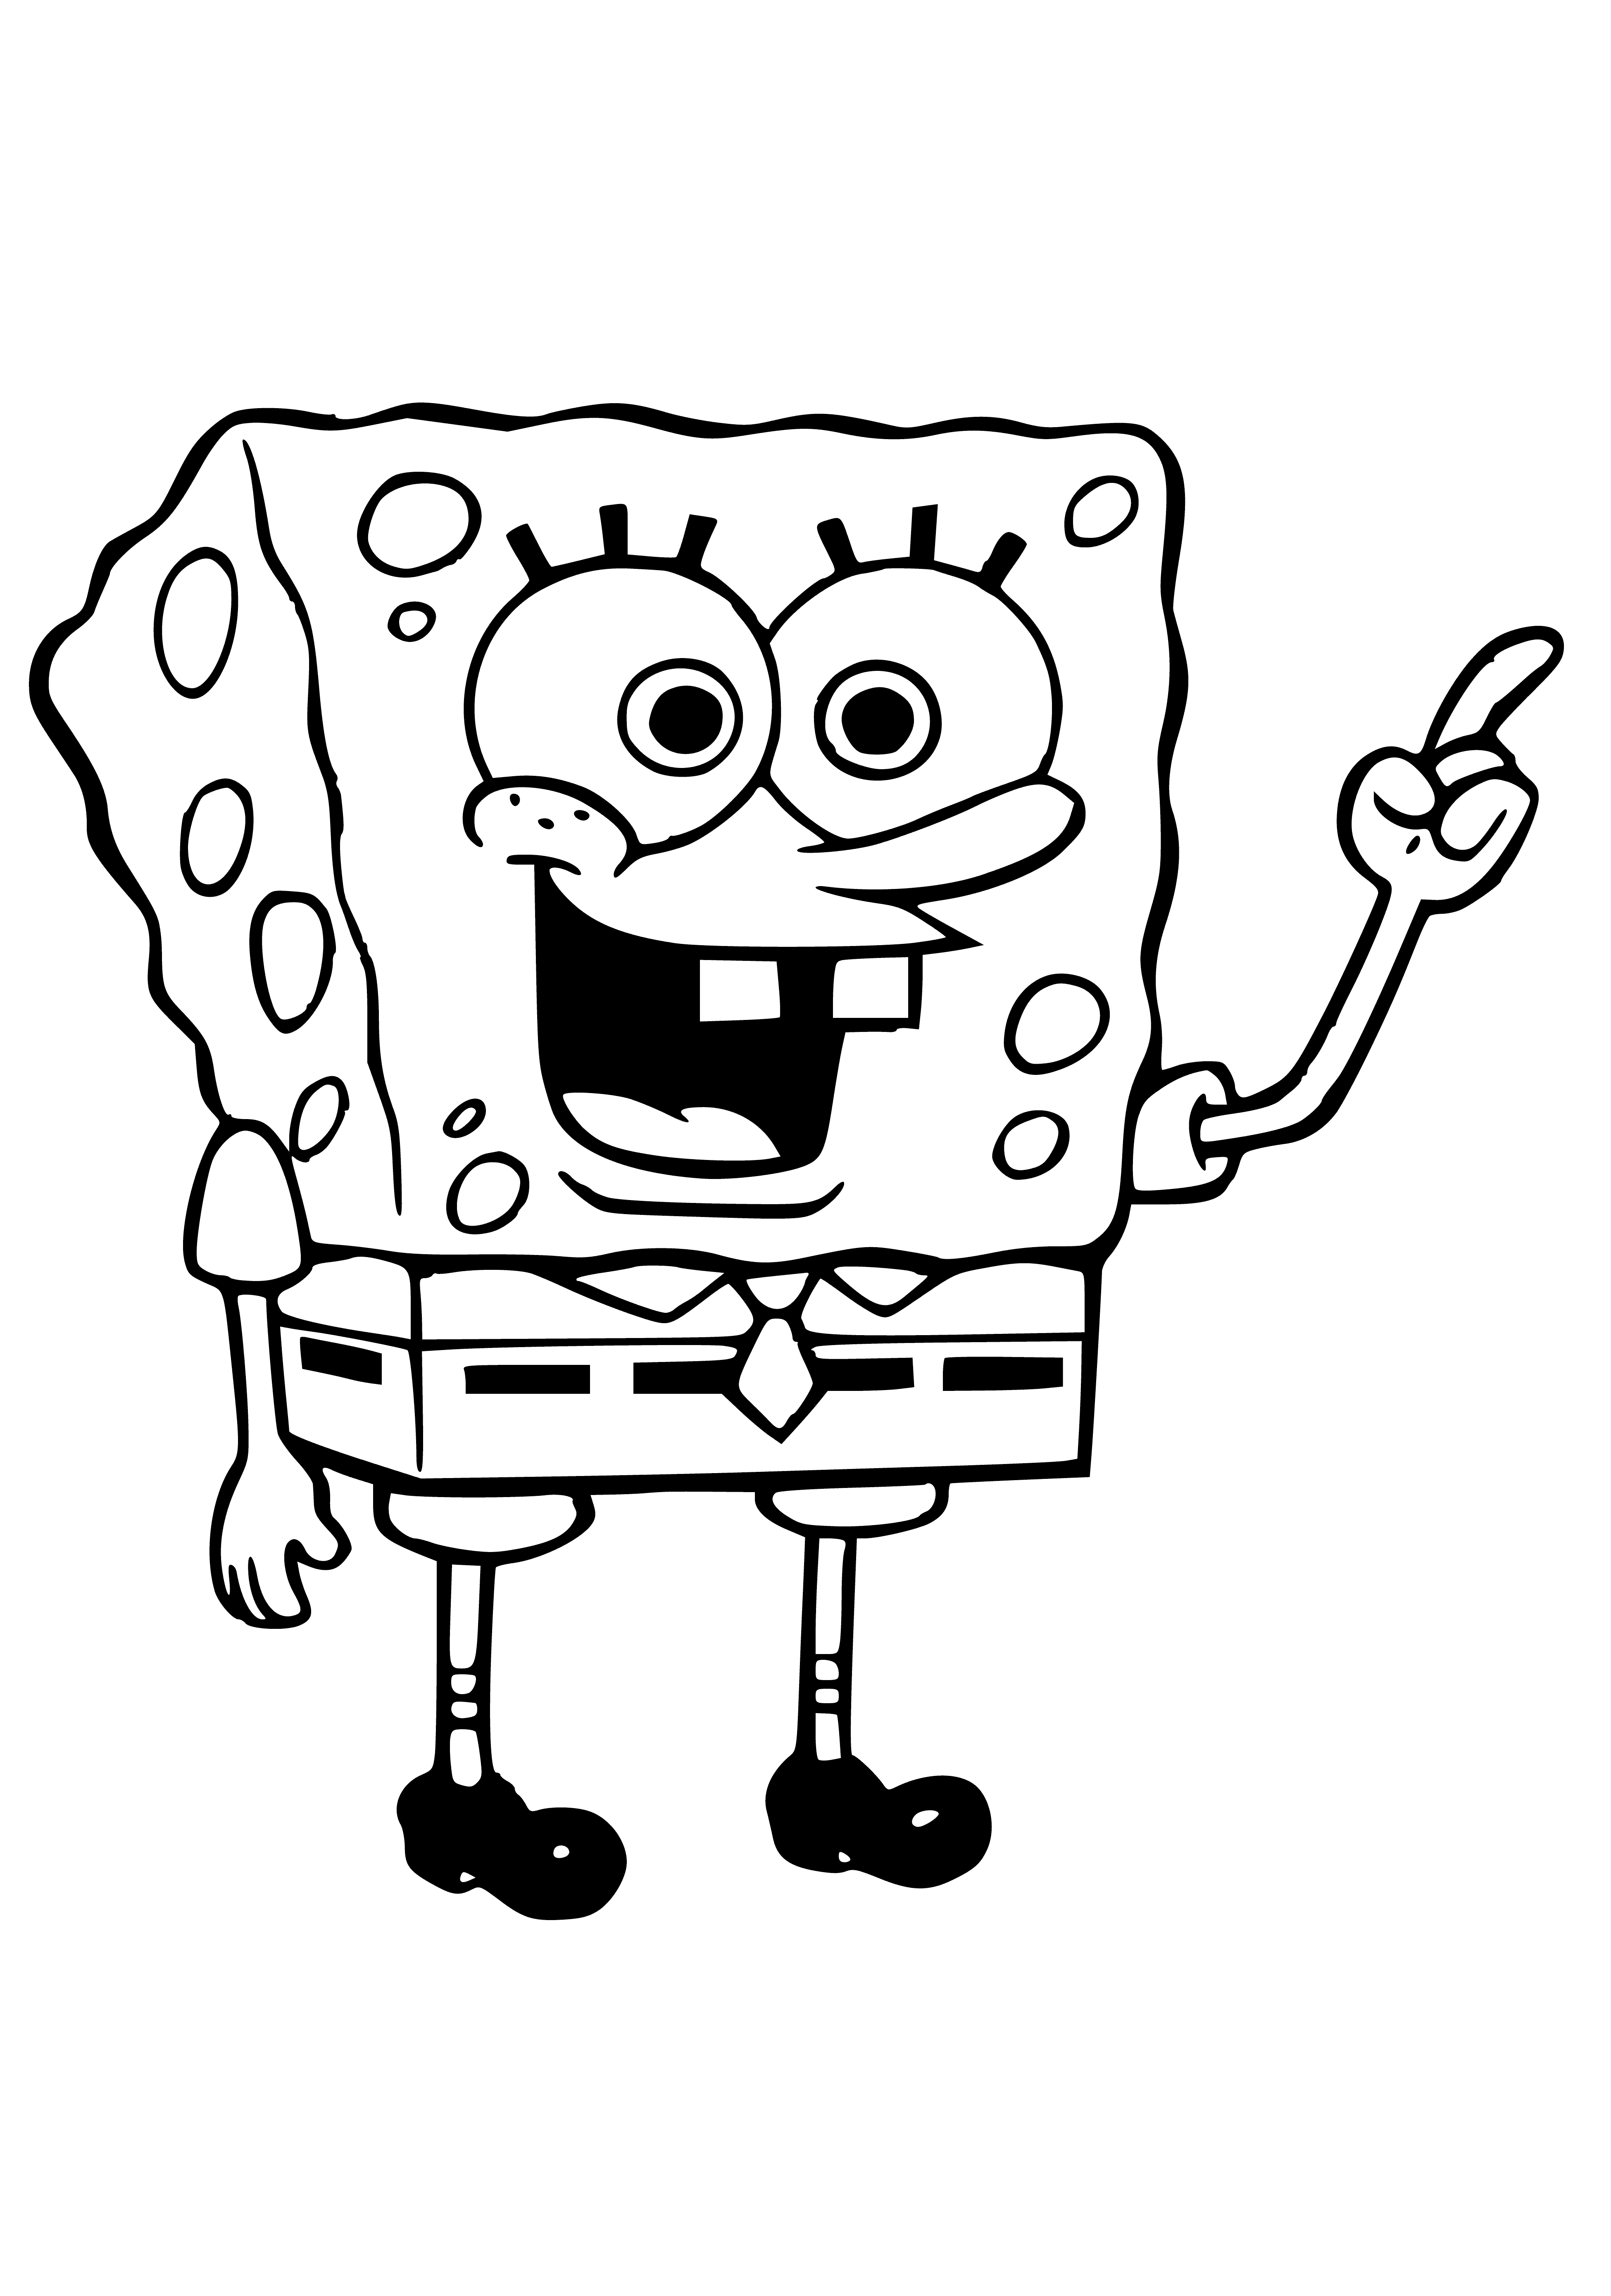 coloring page: SpongeBob SquarePants, smiling with square pants and a tie, ready to be colored!